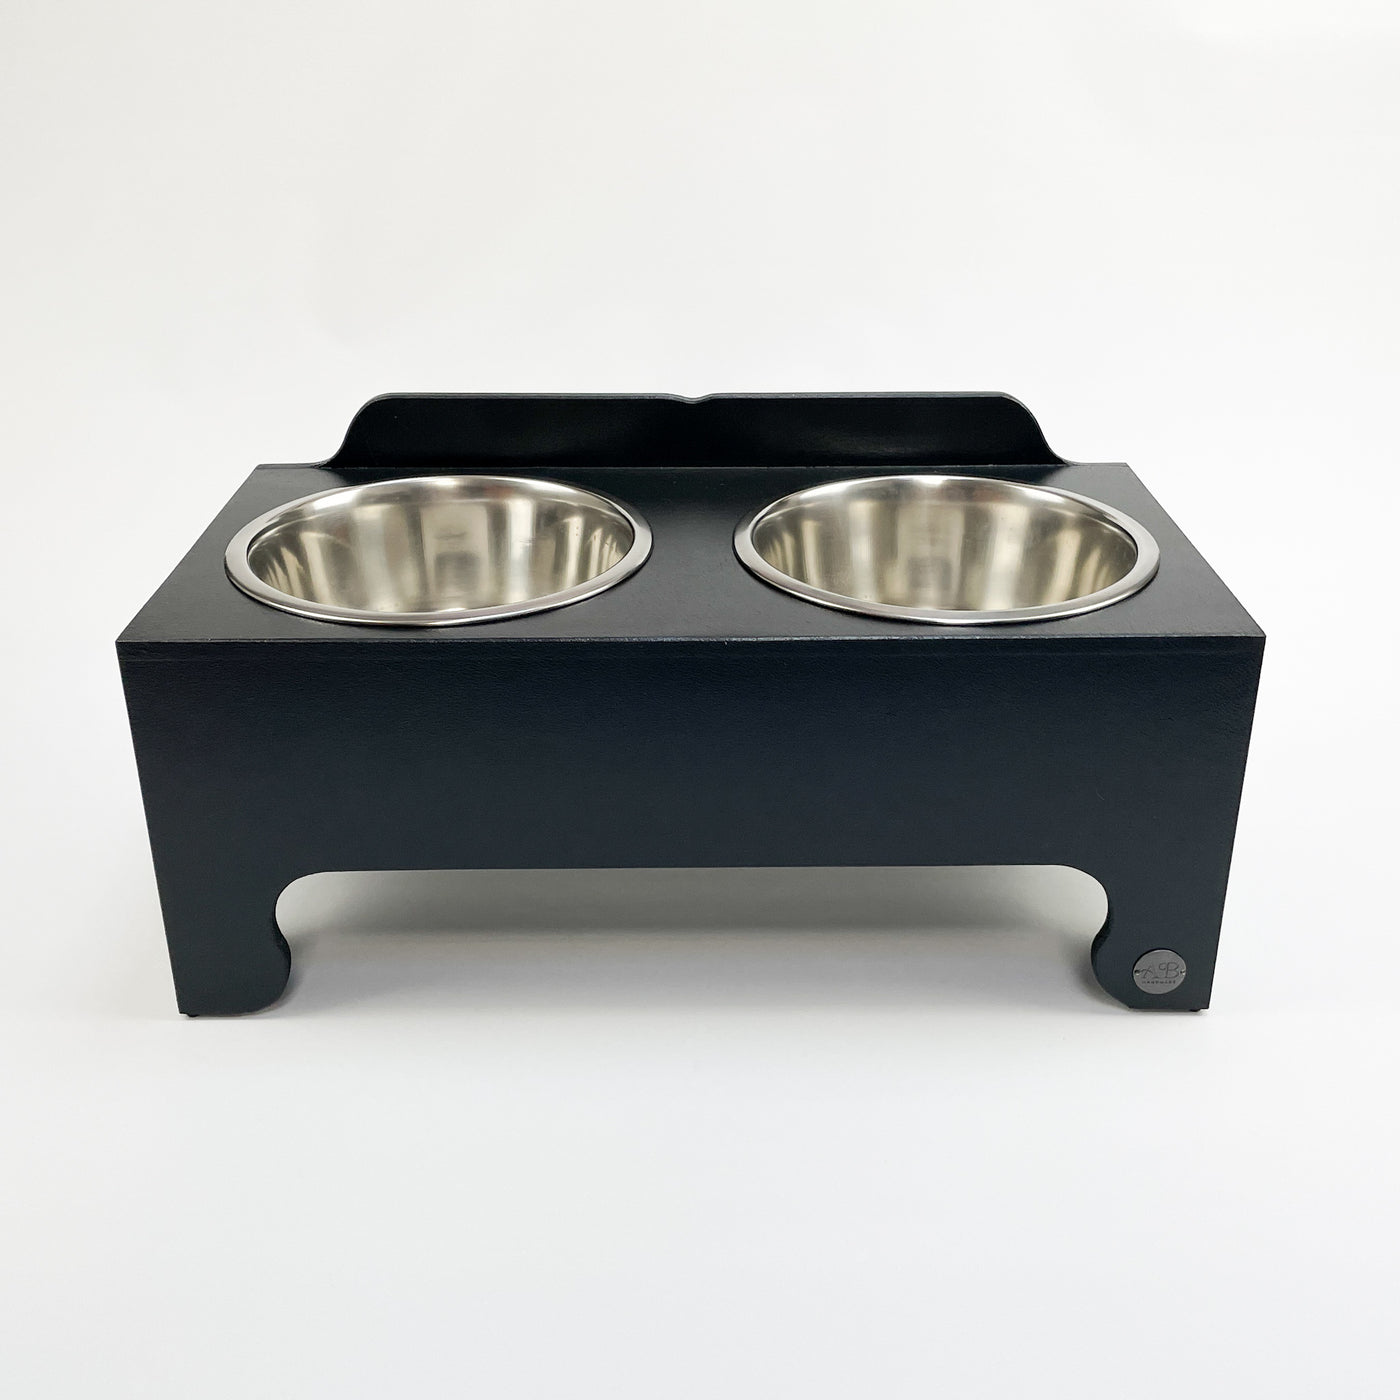 Double-dish raised pet feeder in charcoal black.